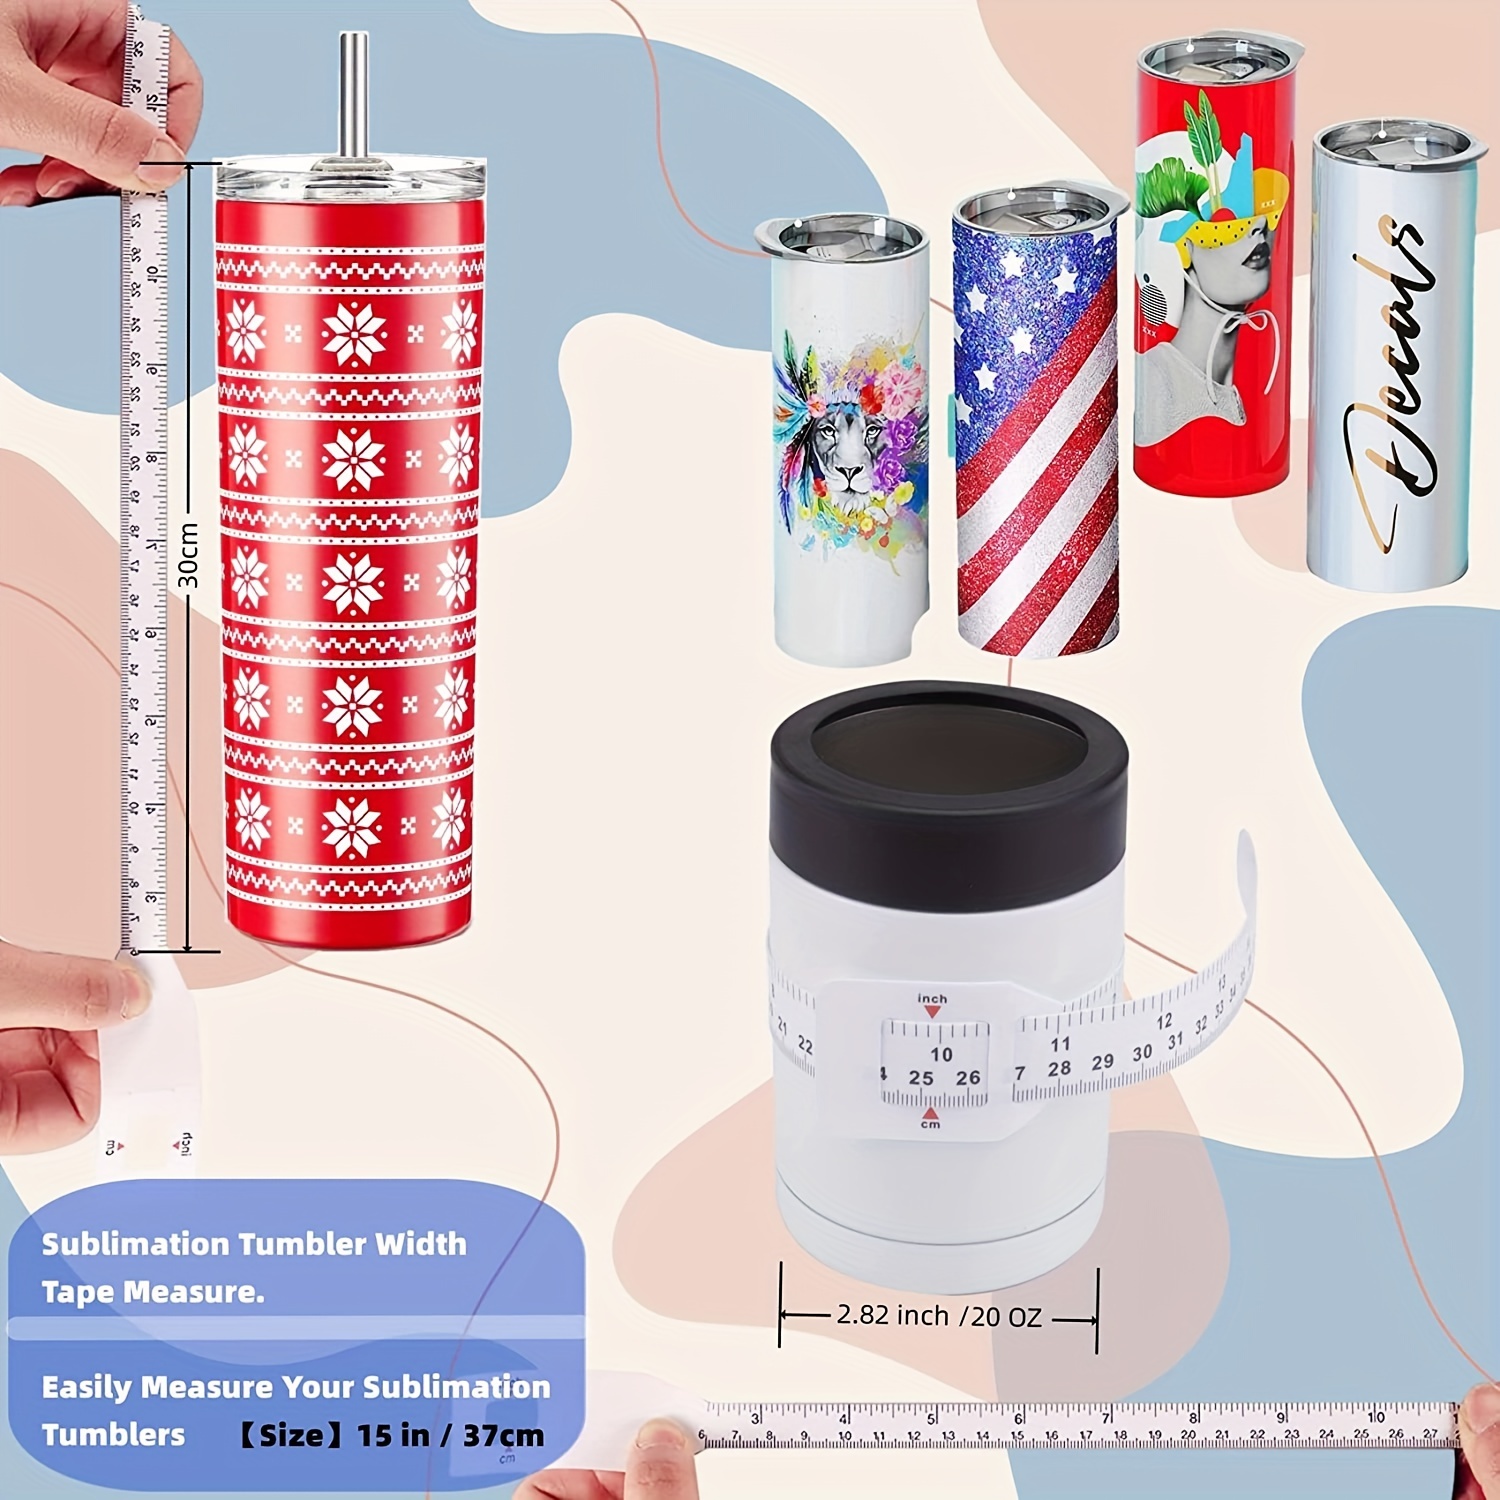 Silicone Sublimation Tumbler Clamp For Tumblers, Pincher For